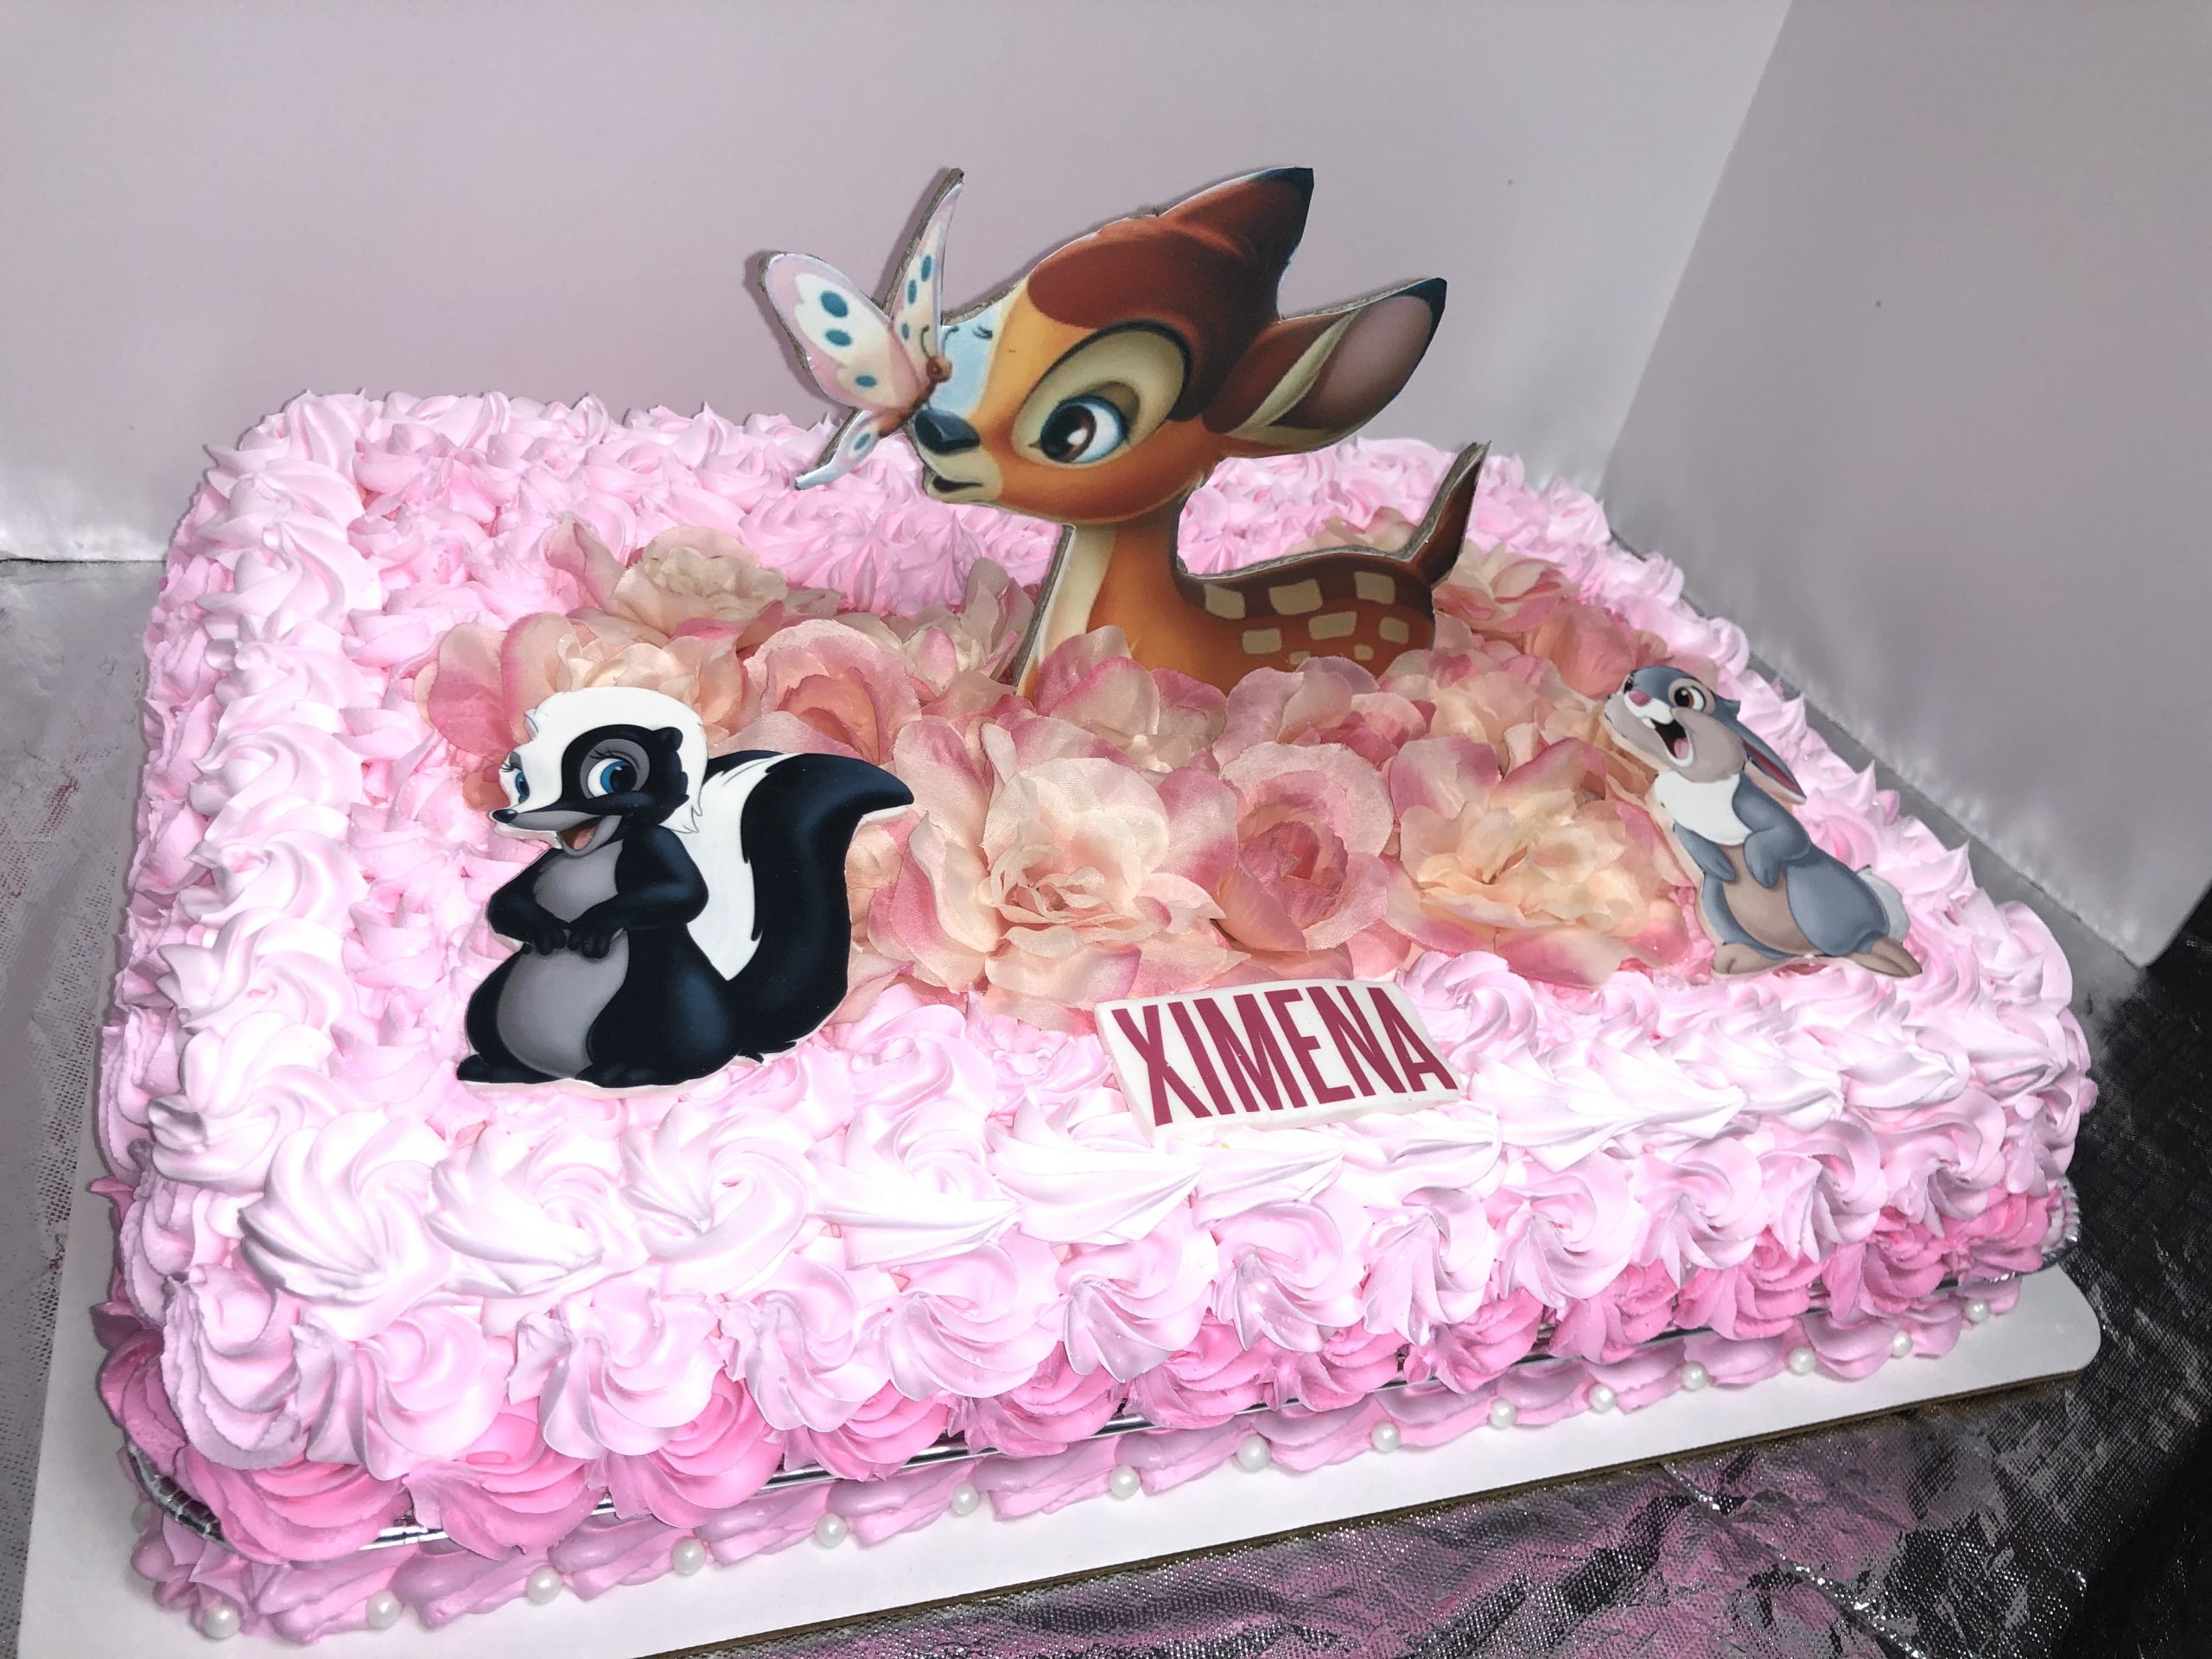 Bambi - Cakes by Bella